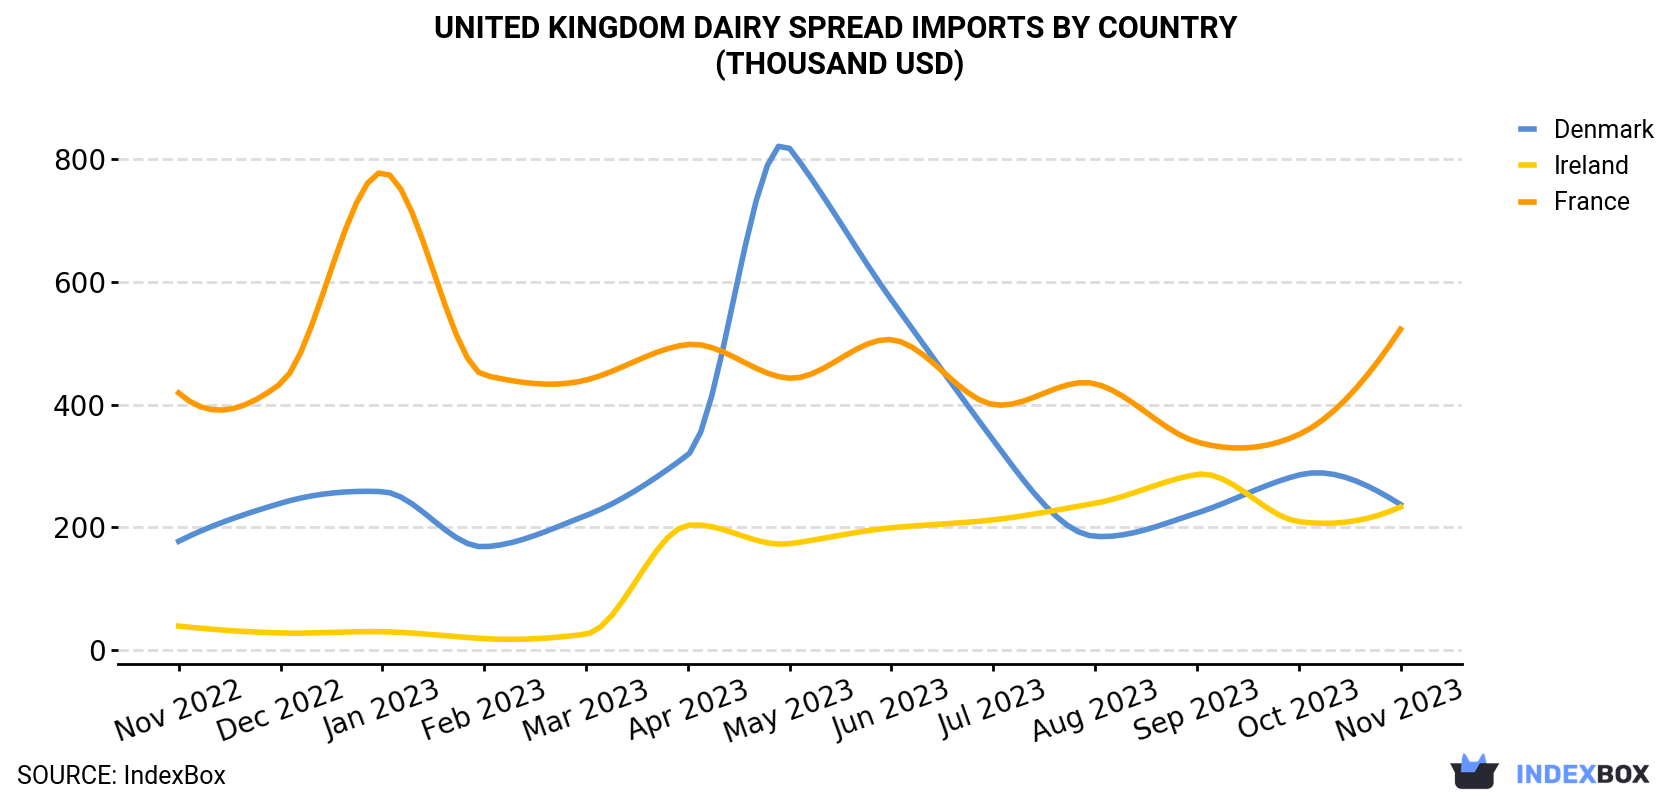 United Kingdom Dairy Spread Imports By Country (Thousand USD)